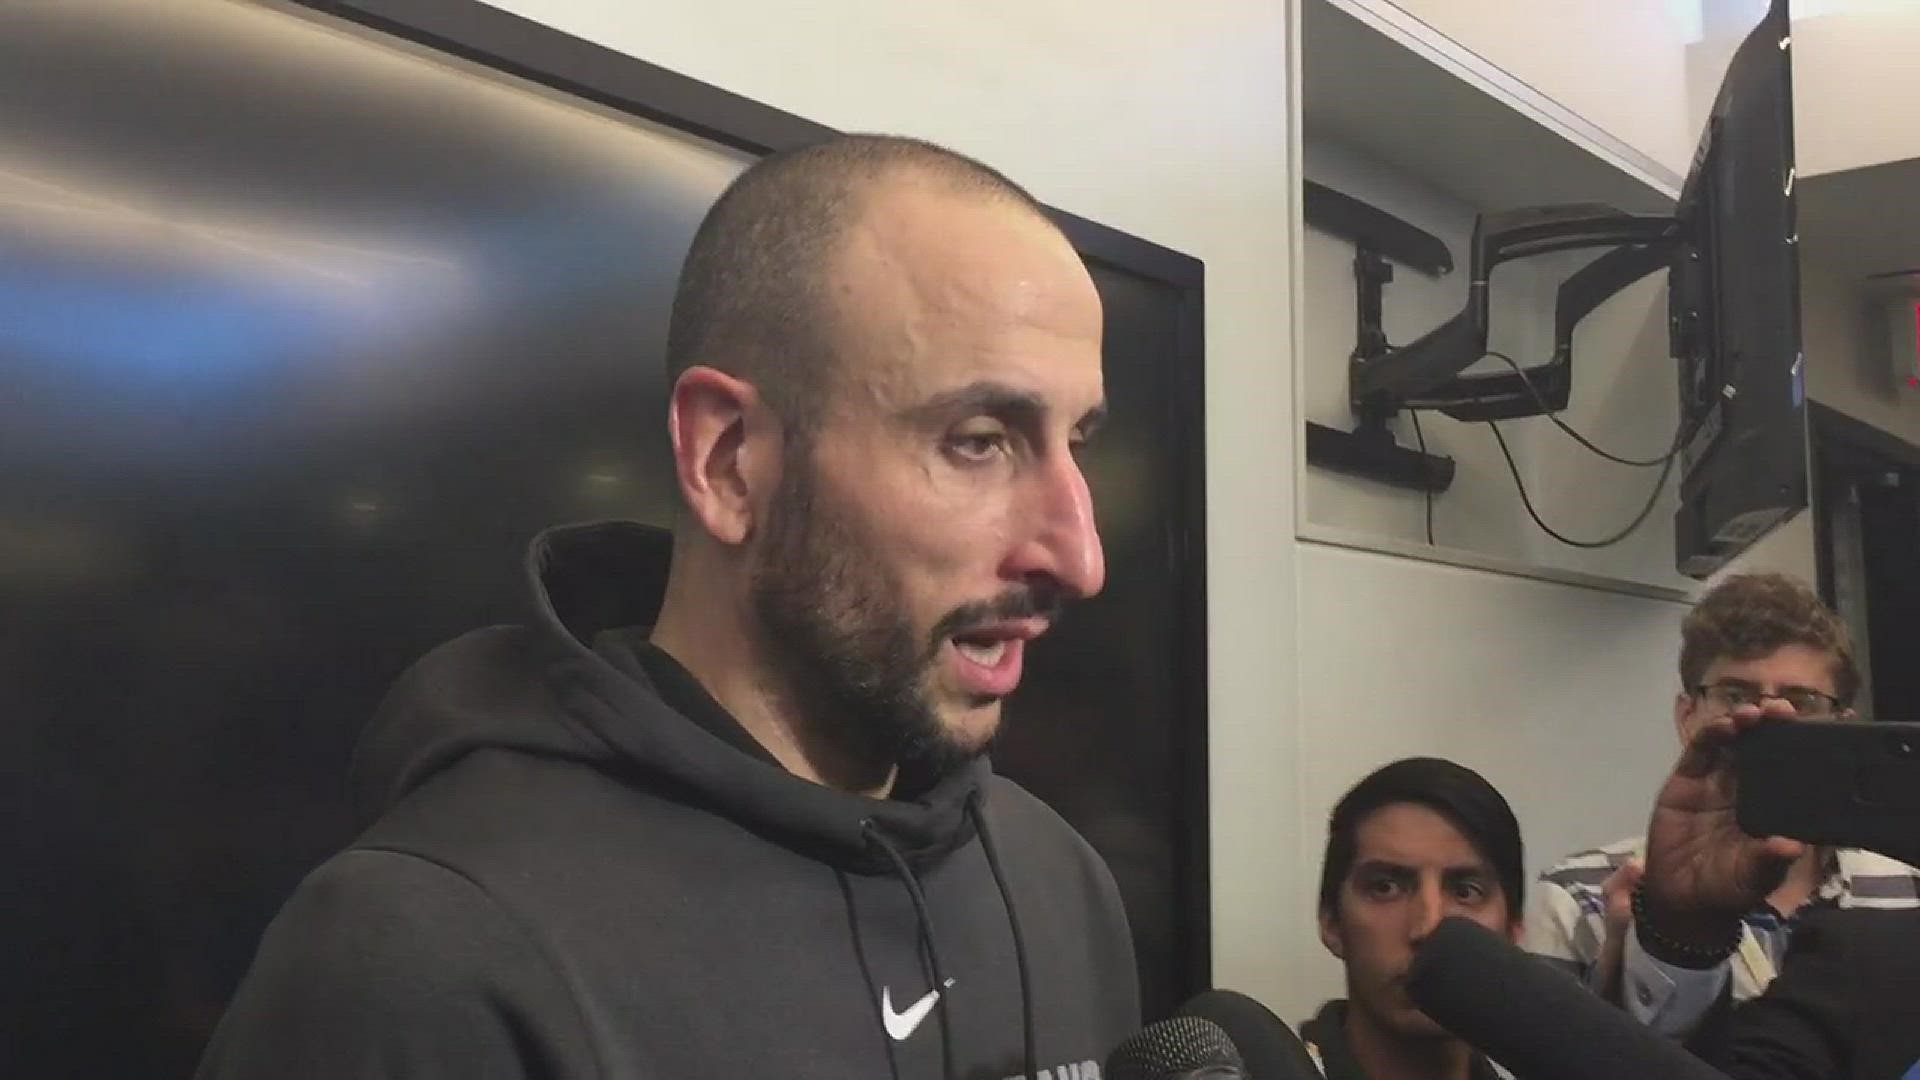 Manu talks about the Spurs' win over the Kings on Sunday night